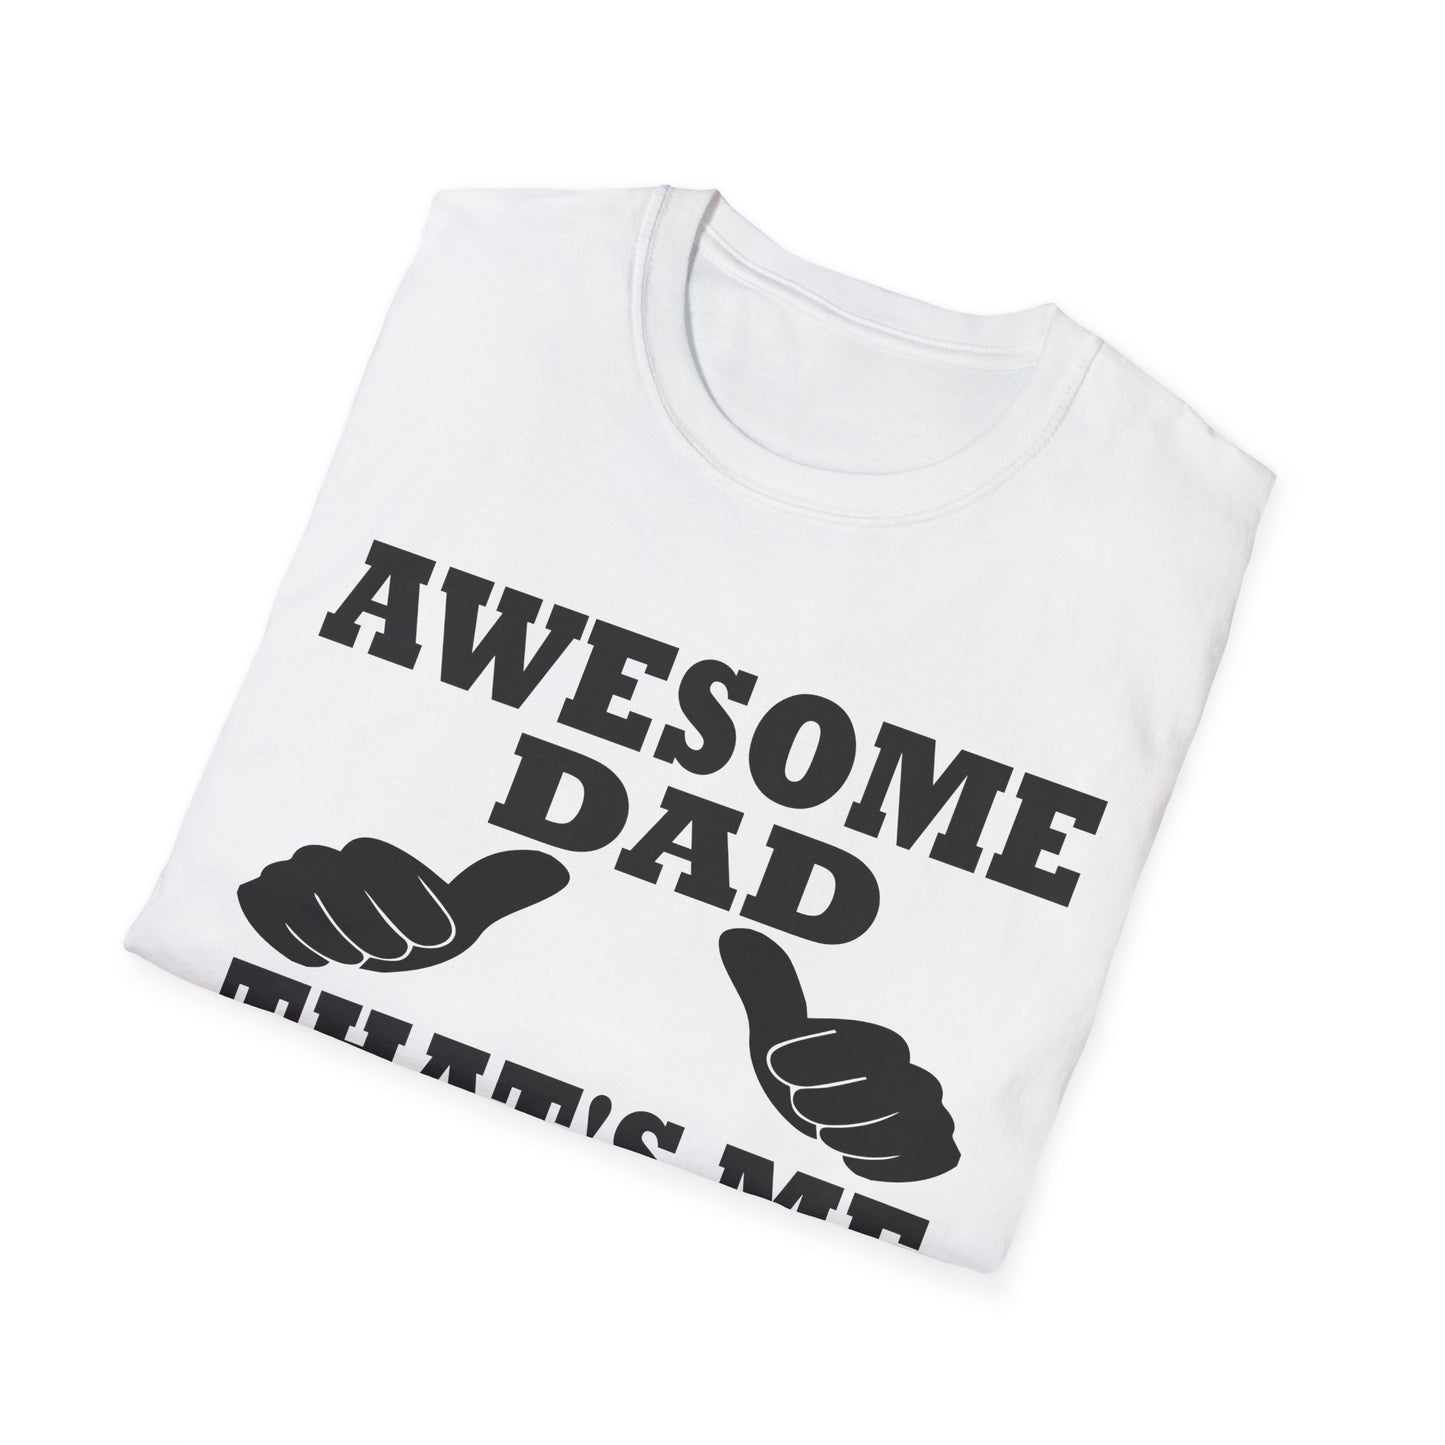 Awesome Dad Soft style T-Shirt